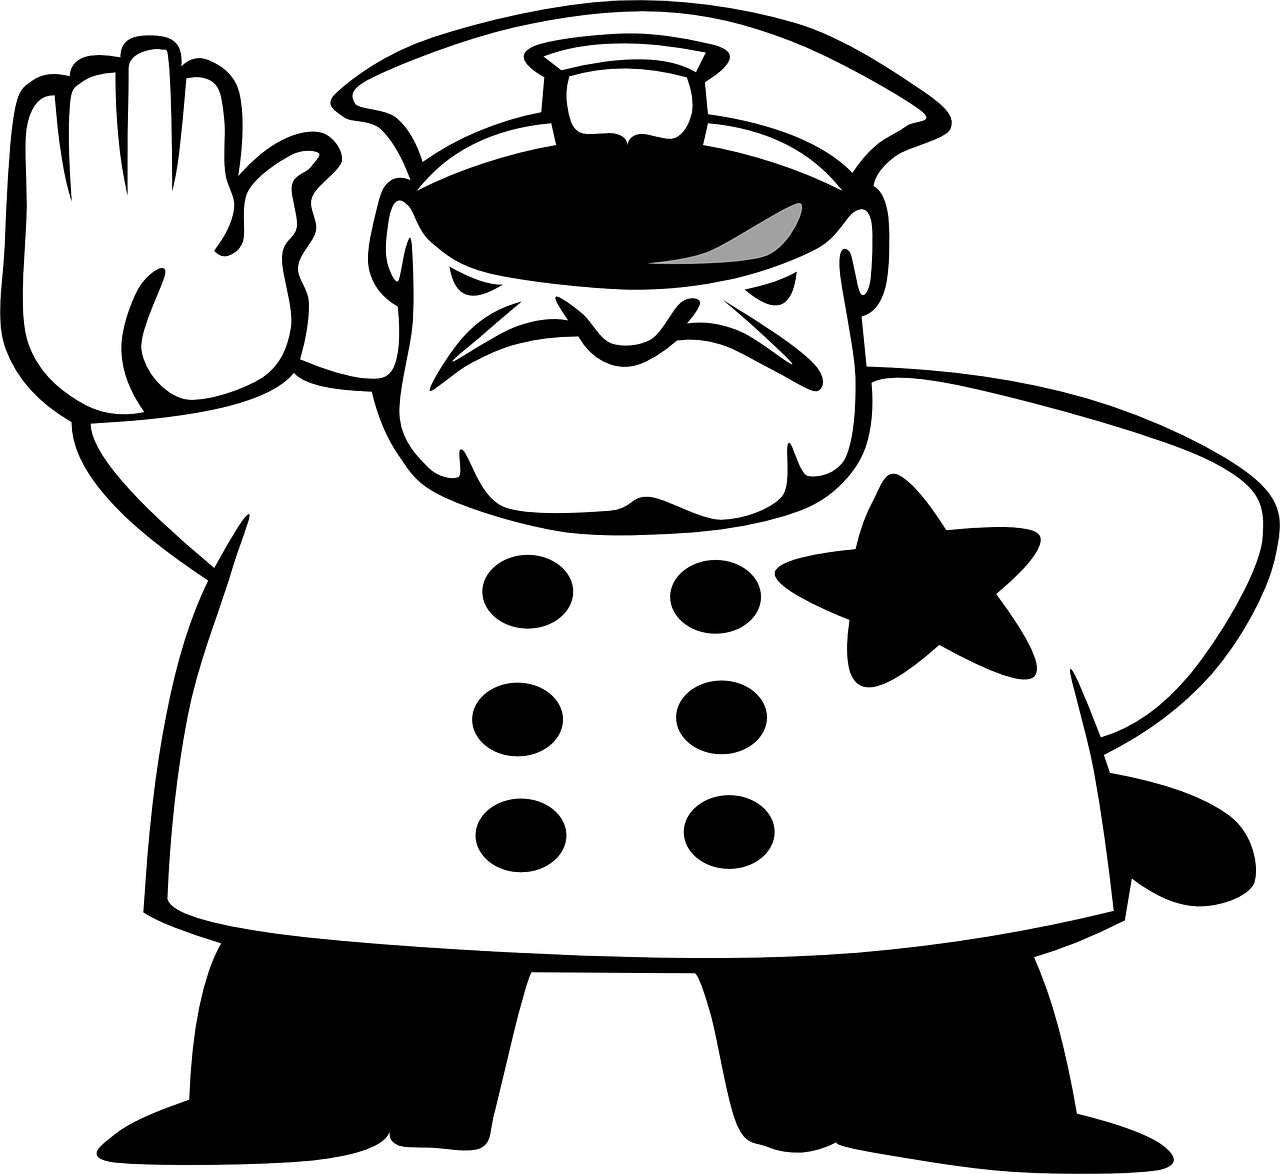 Hat drawing at getdrawings. Handcuff clipart police cap